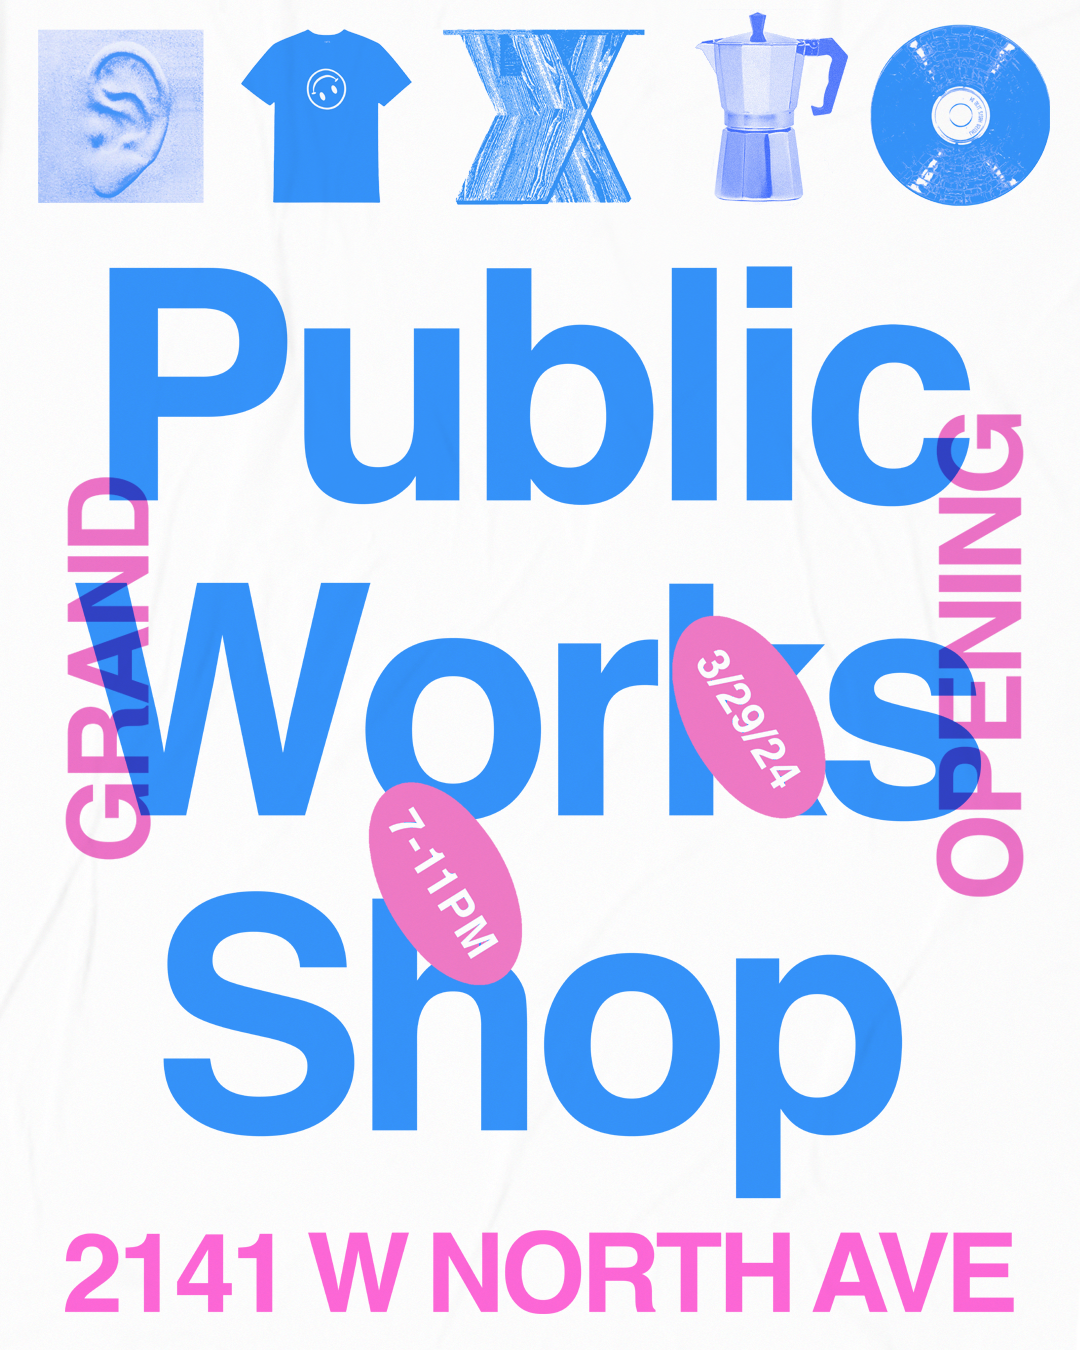 Public Works Shop: Grand Opening